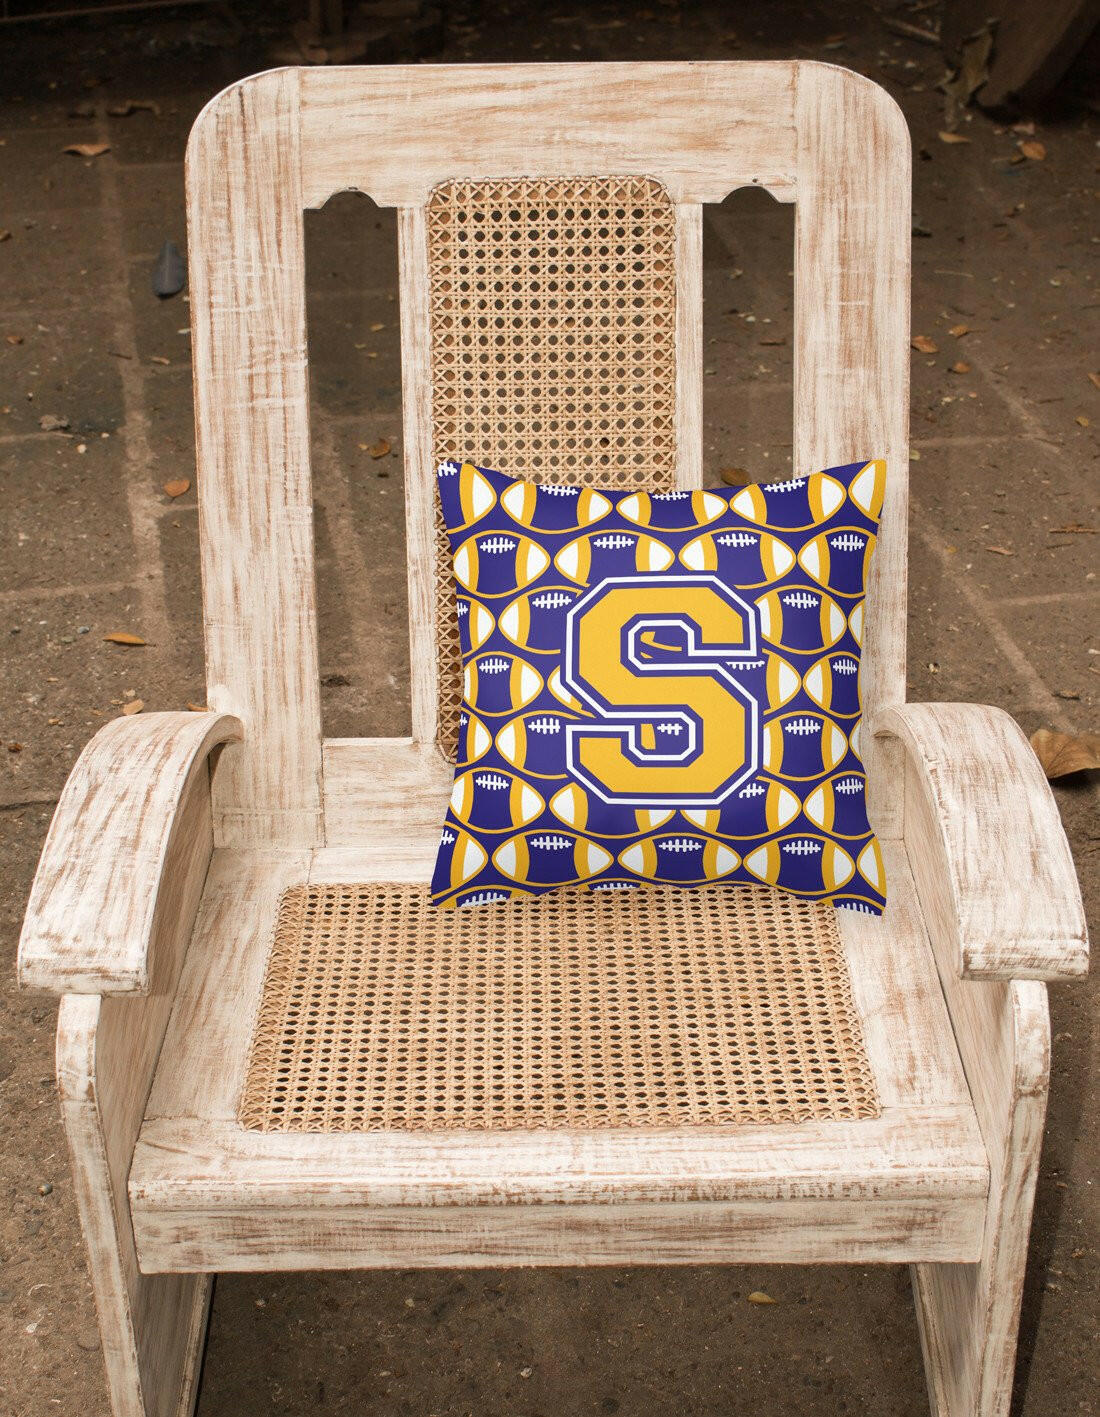 Letter S Football Purple and Gold Fabric Decorative Pillow CJ1064-SPW1414 by Caroline's Treasures